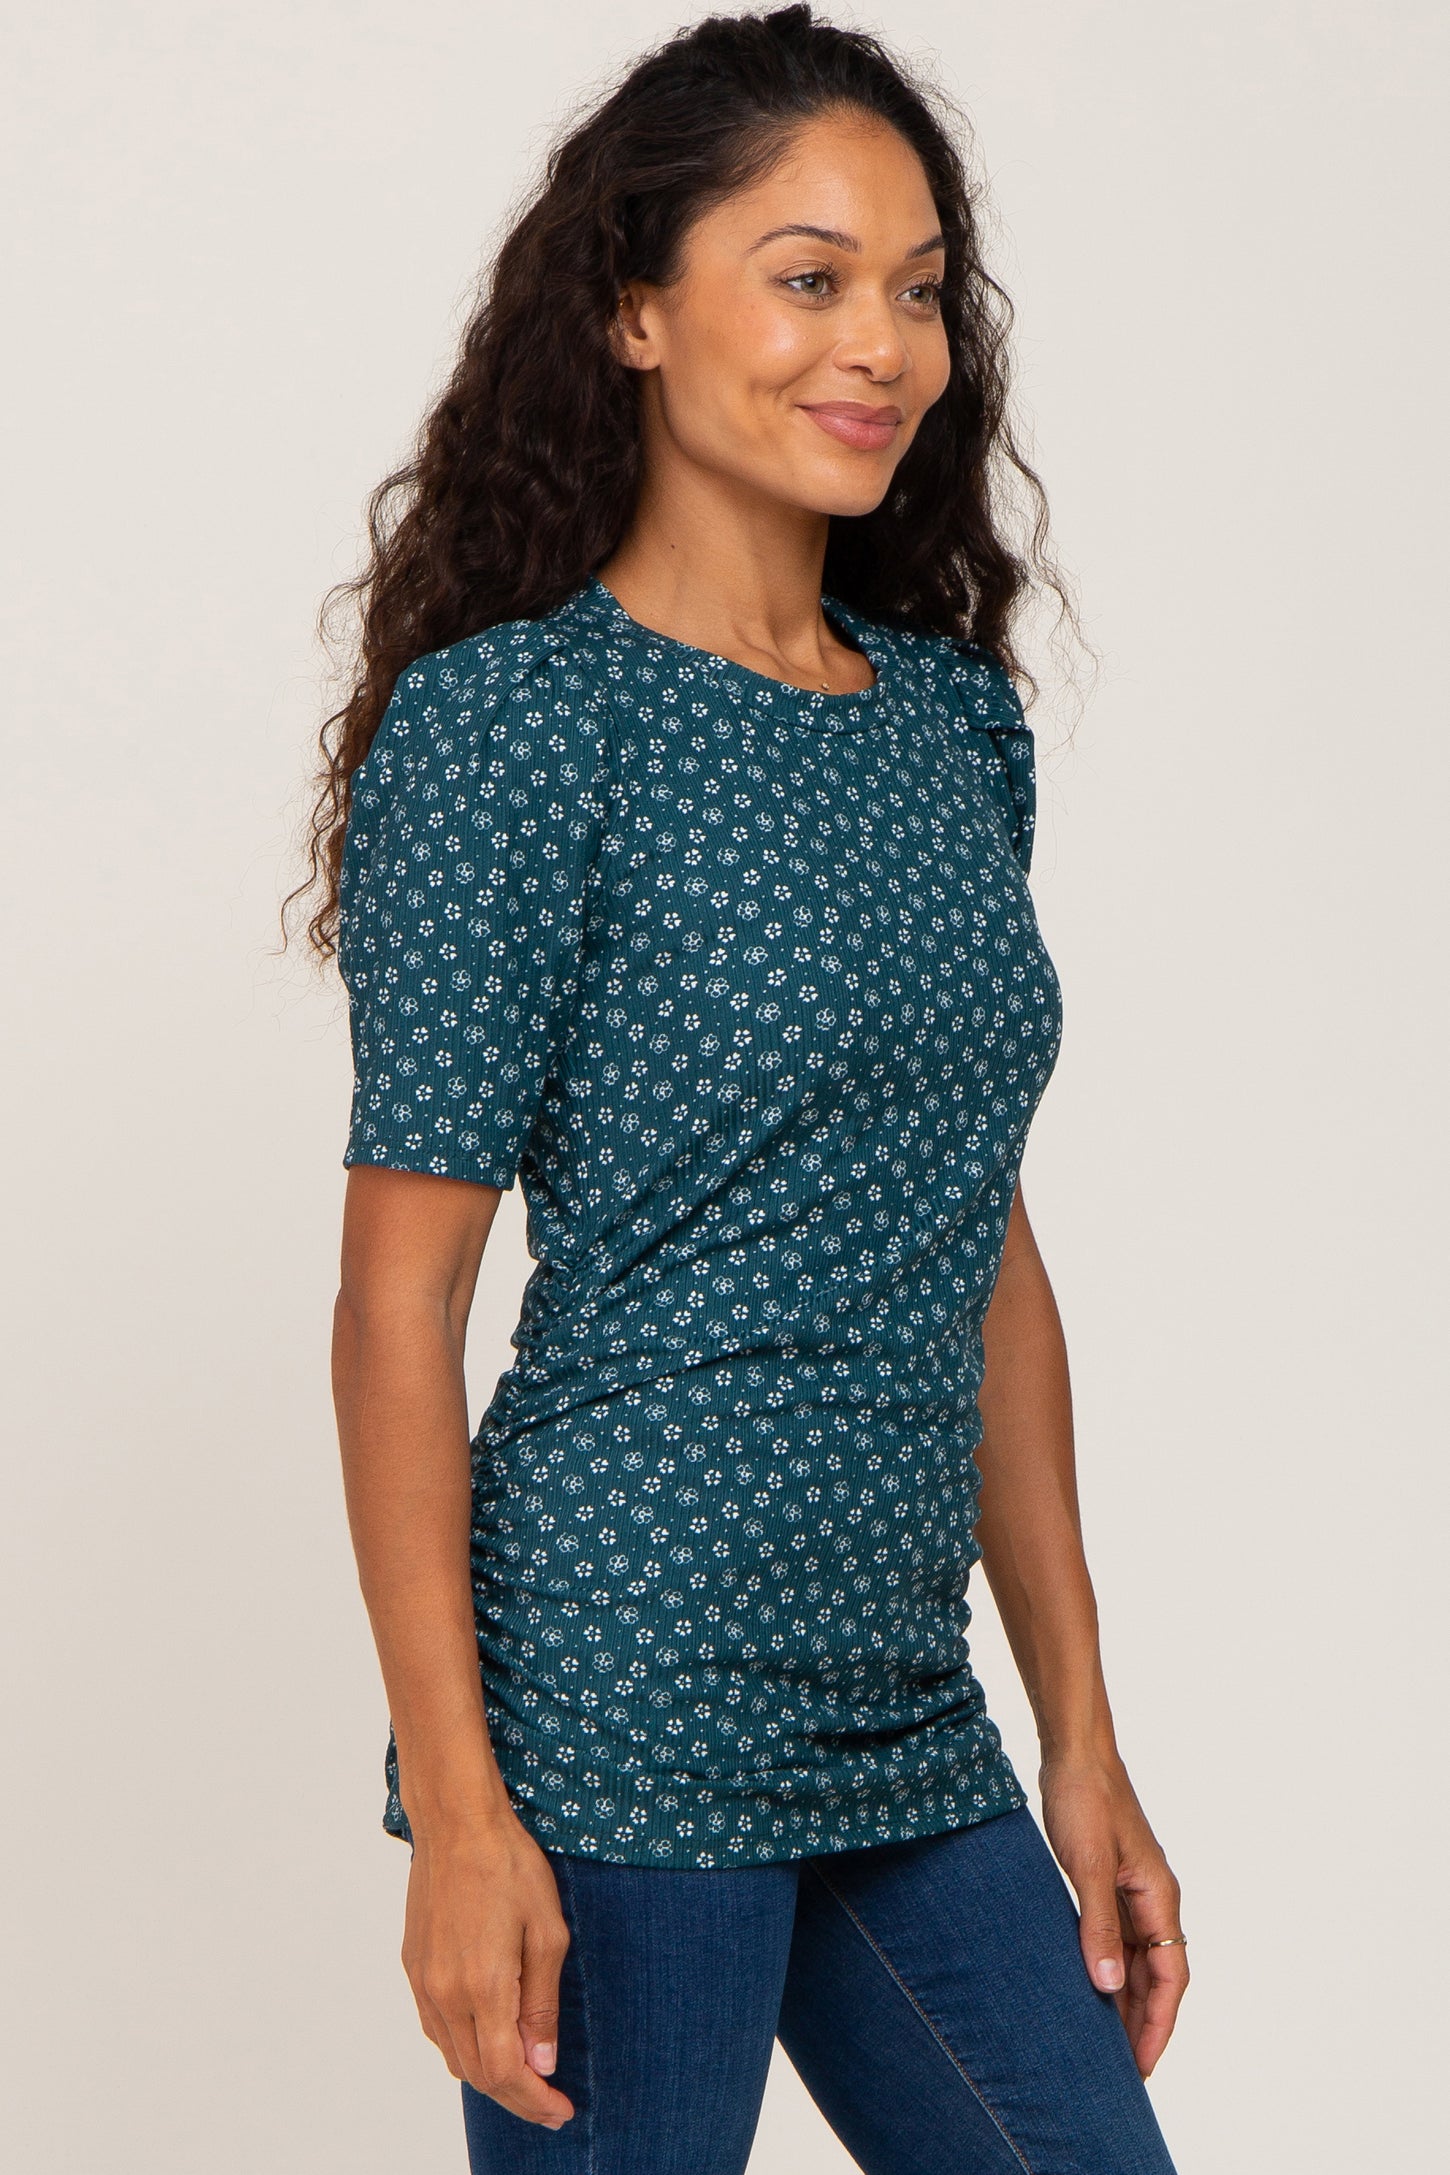 Dark Teal Floral Ribbed Fitted Top